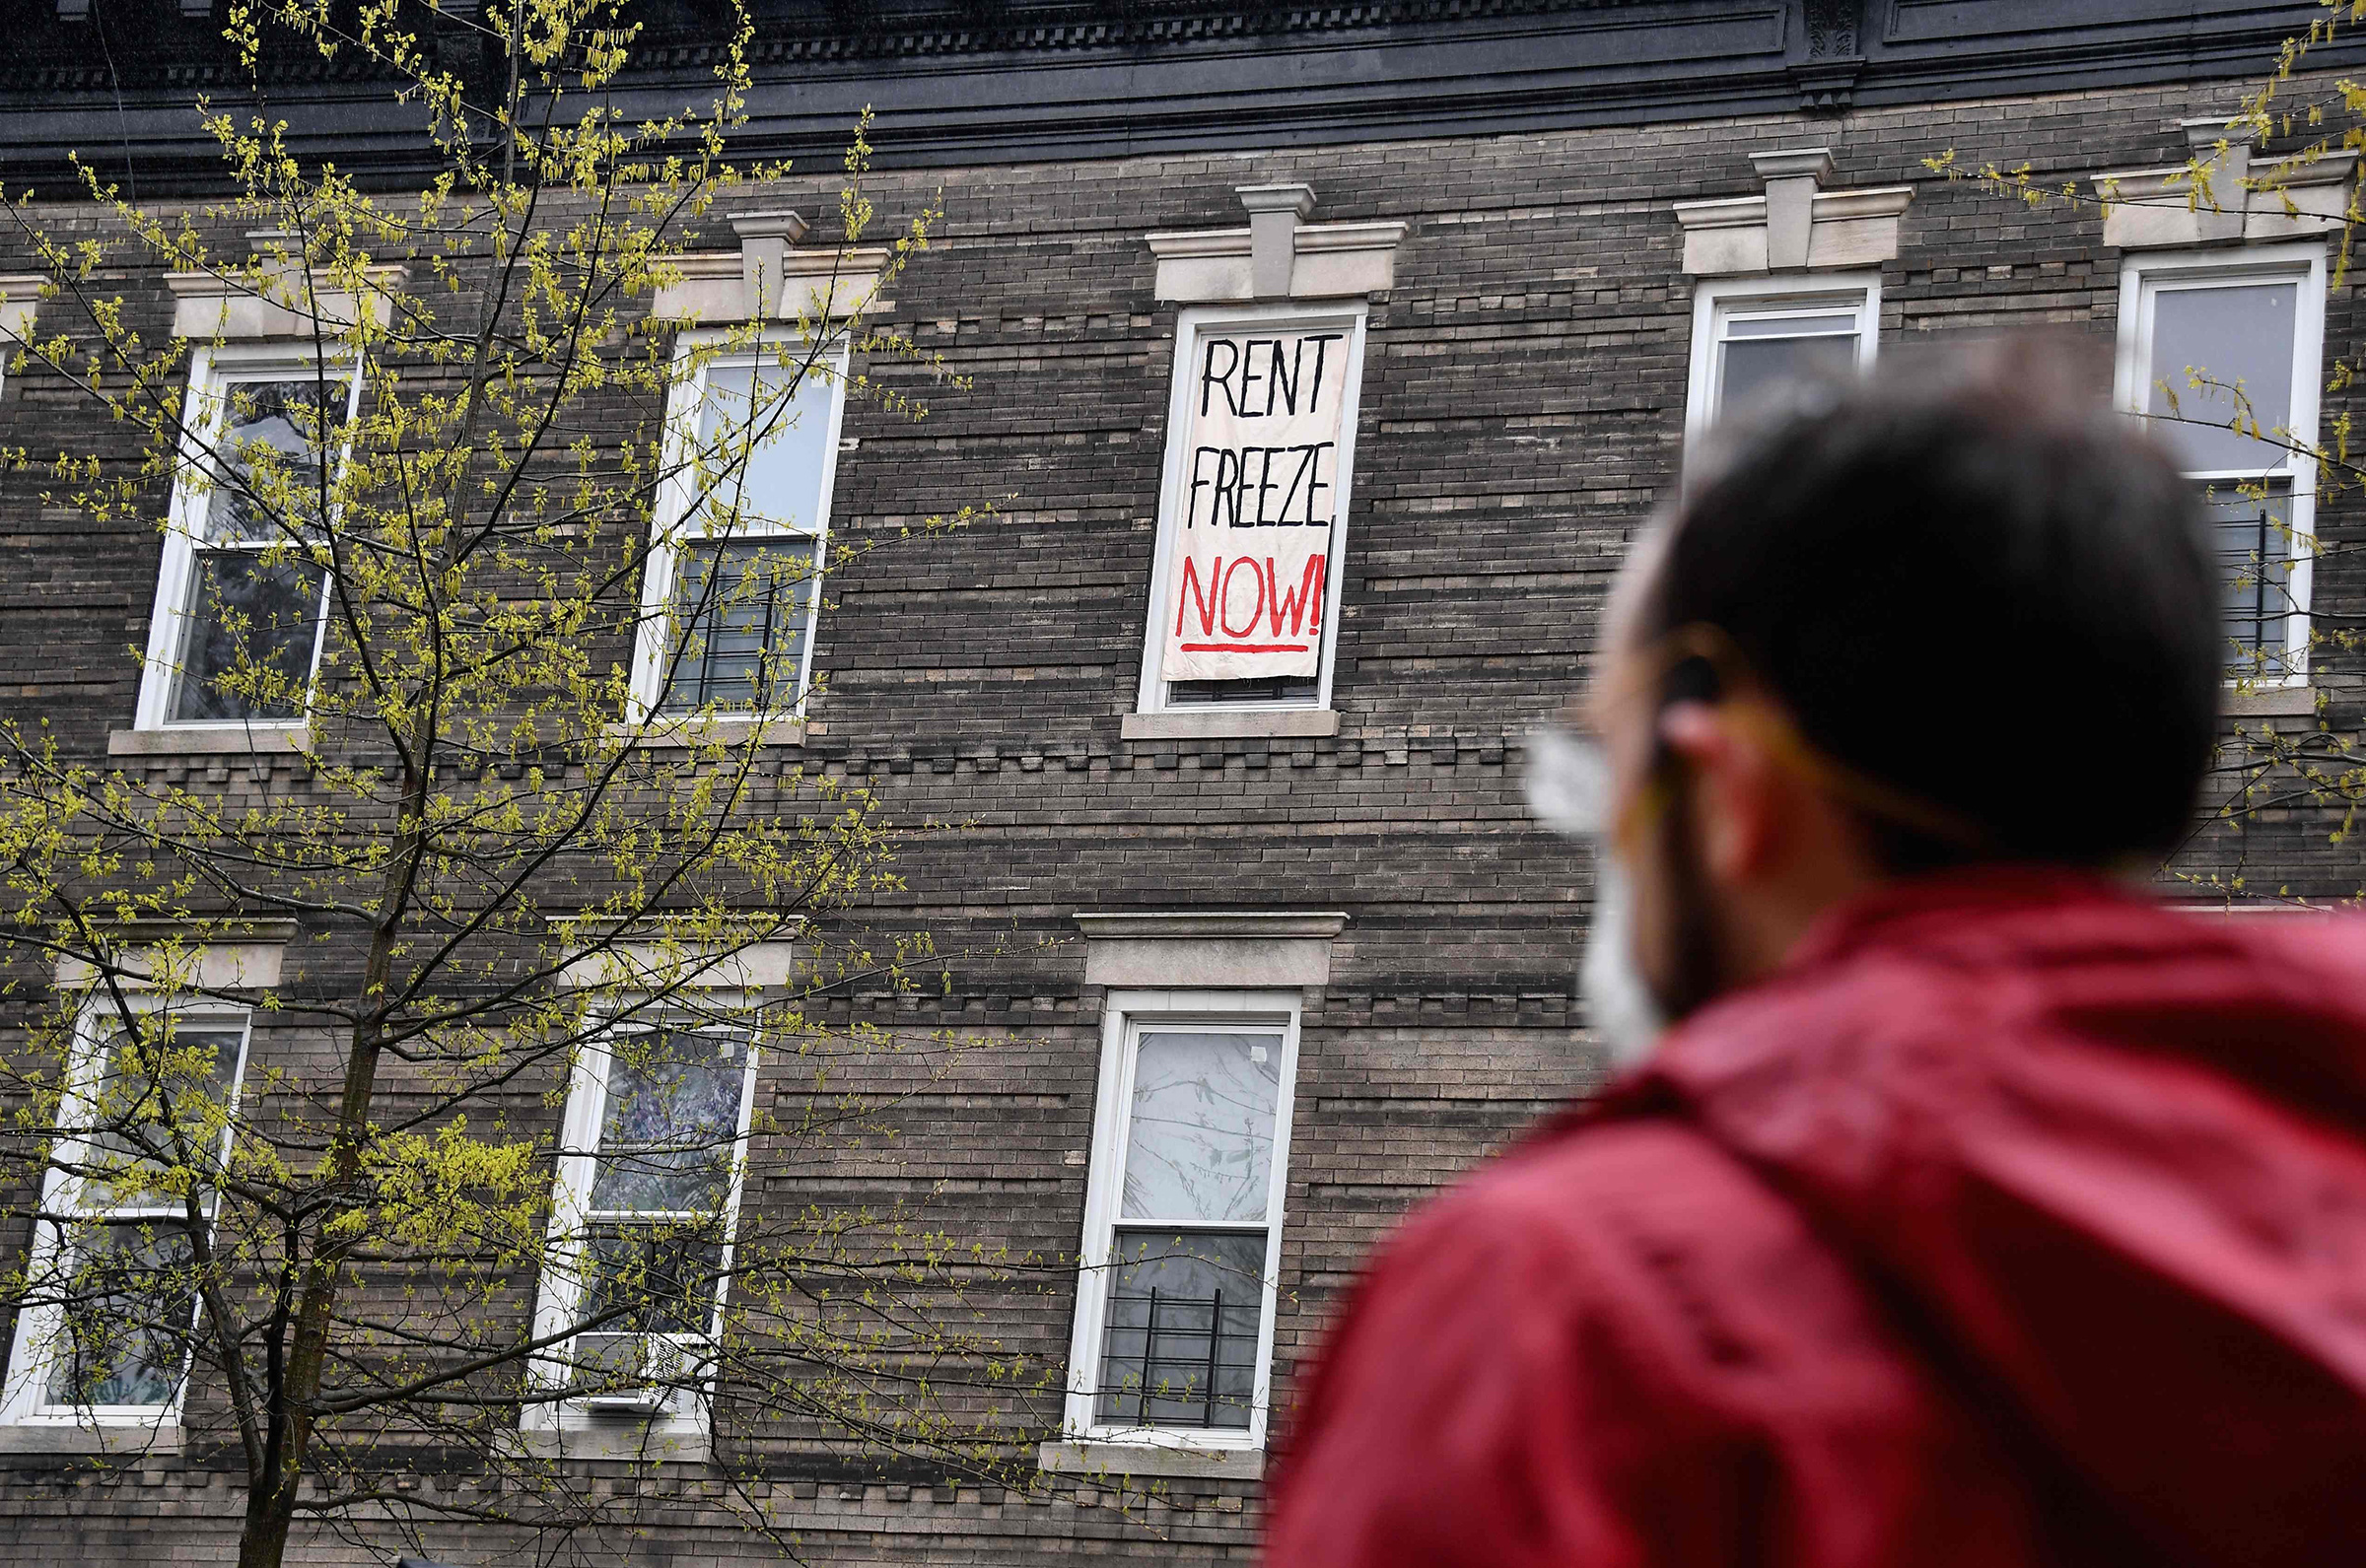 A Crown Heights building tenant stages a rent strike on May 1 in New York City (Angela Weiss—AFP/Getty Images)